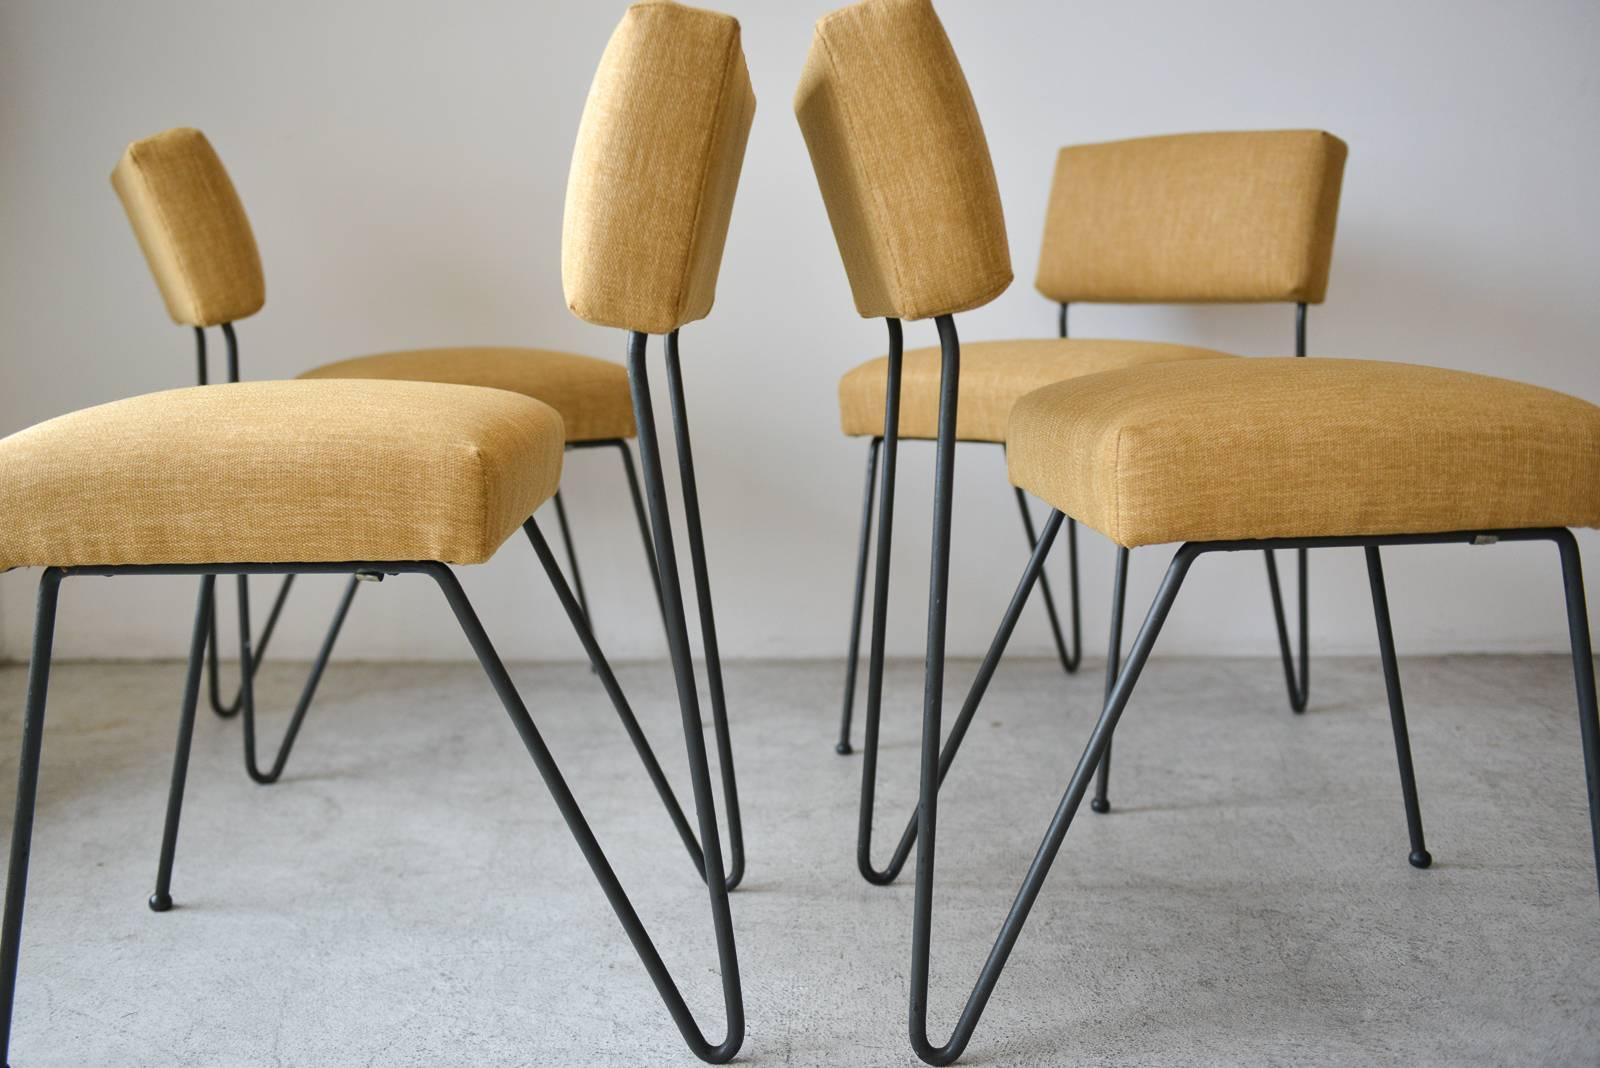 Rare set of four iron chairs by Vista of California, circa 1955. Distinct California modernist style, with cantilever backs. Very reminiscent of Dorothy Schindele, sometimes confused with her work. Professionally reupholstered in beautiful mustard